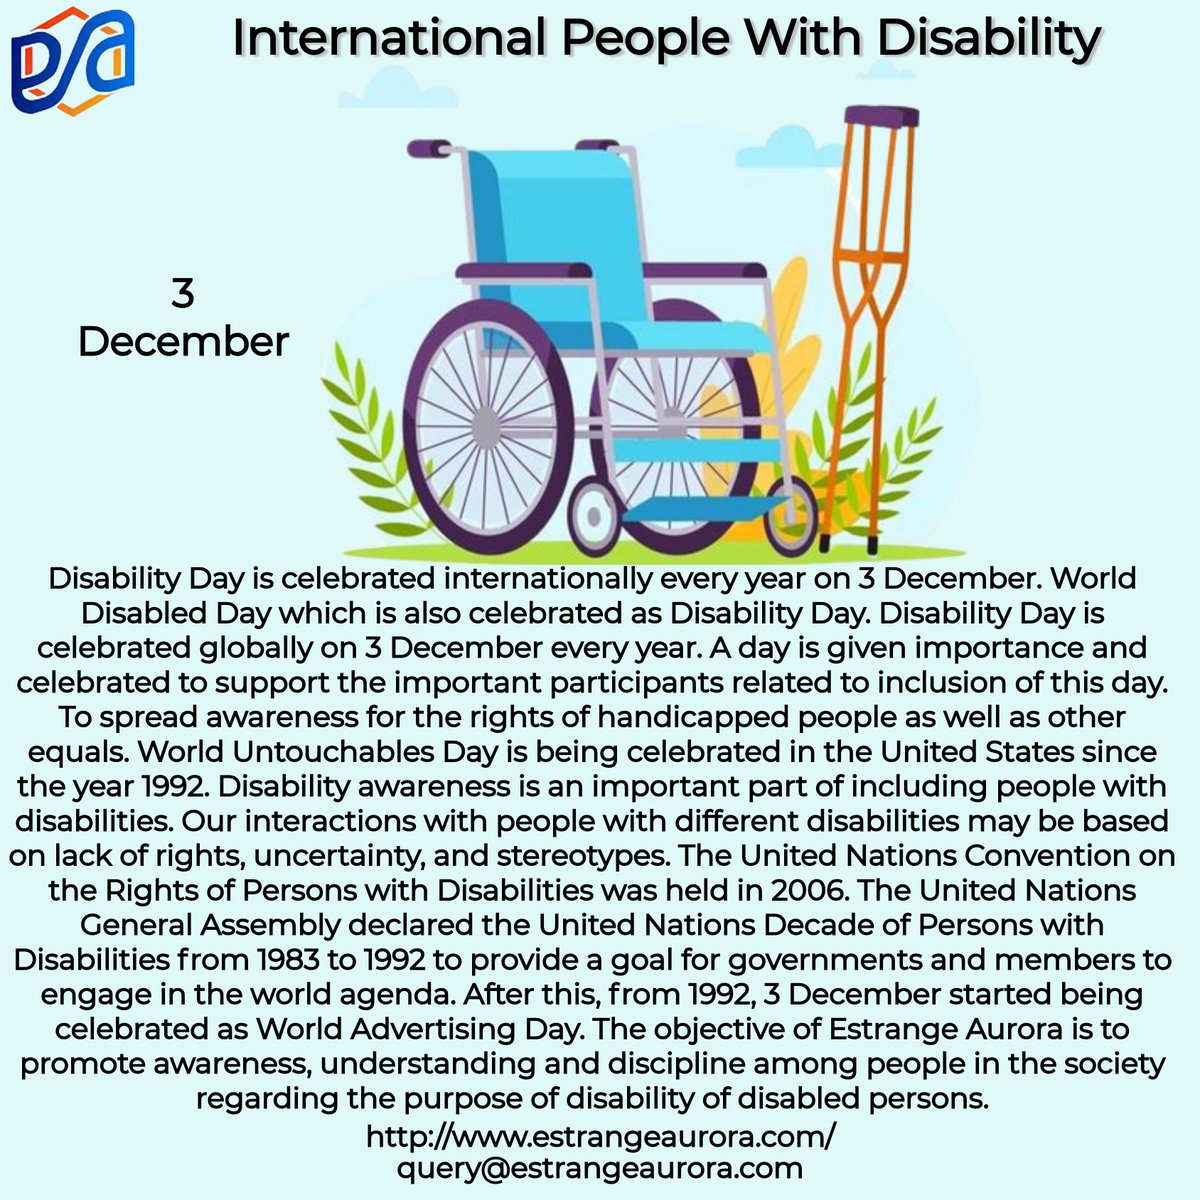 Happy International People With Disability.
#disability #disabilityawareness #disabled #wheelchair #inclusion #autism #chronicillness #wheelchairlife #specialneeds #accessibility #chronicpain #invisibleillness #autismawareness #EstrangeAurora #Indiawithdisable #Indianhealthcare